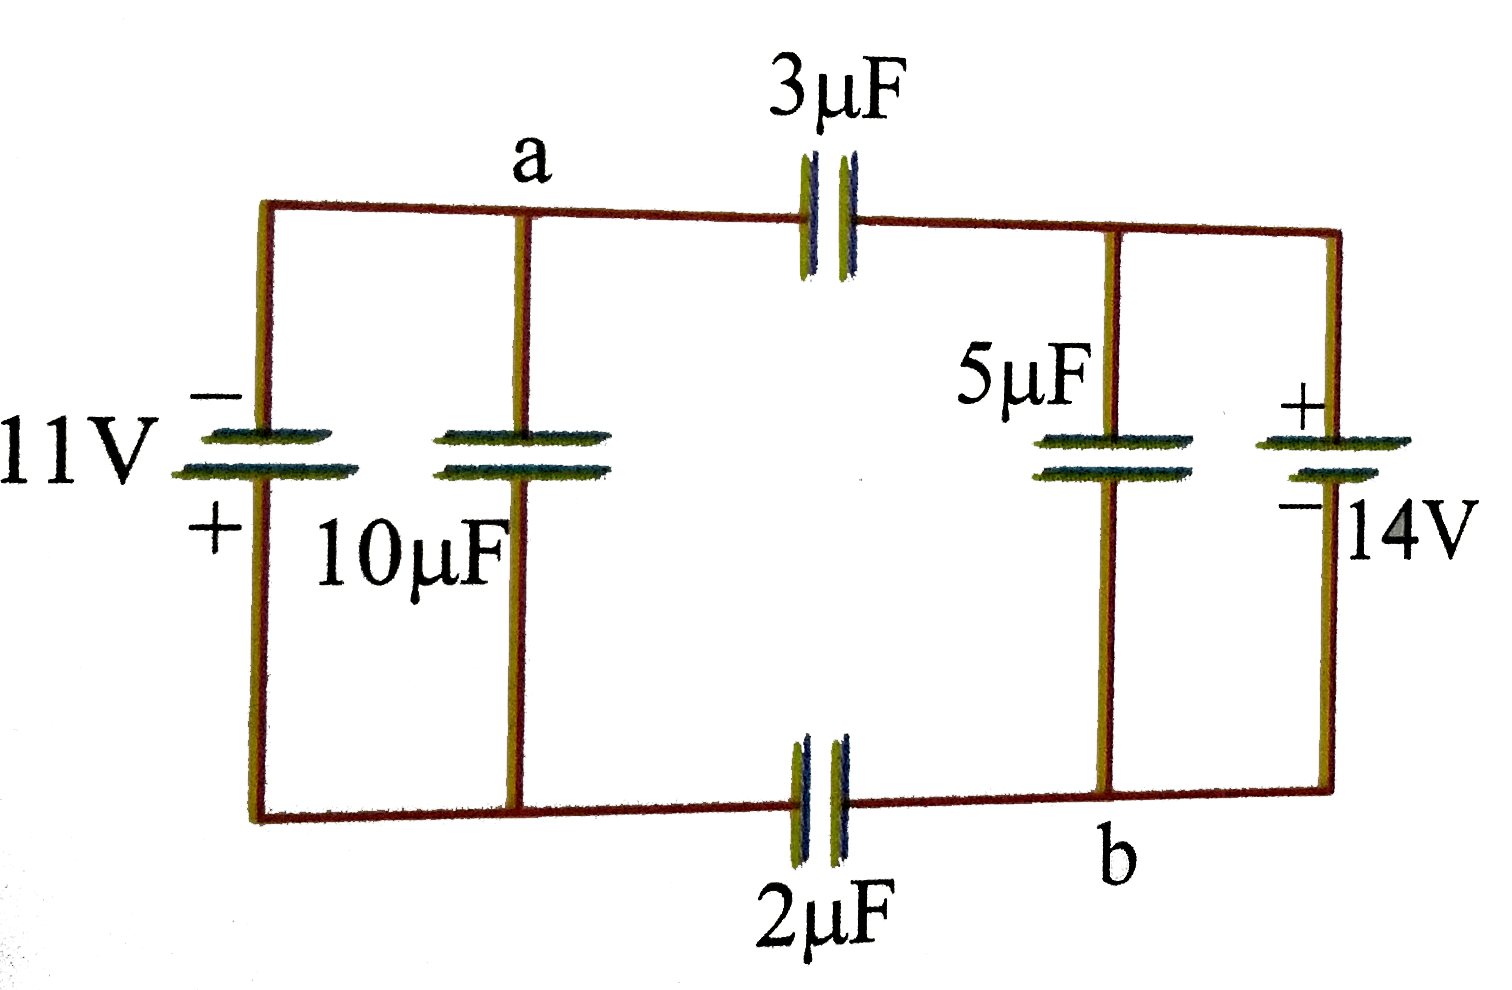 Four capacitors and two batteries are connected as shown in the diagram. If V(a) and V(b) denote the potentials of the points 'a' and 'b' then   .